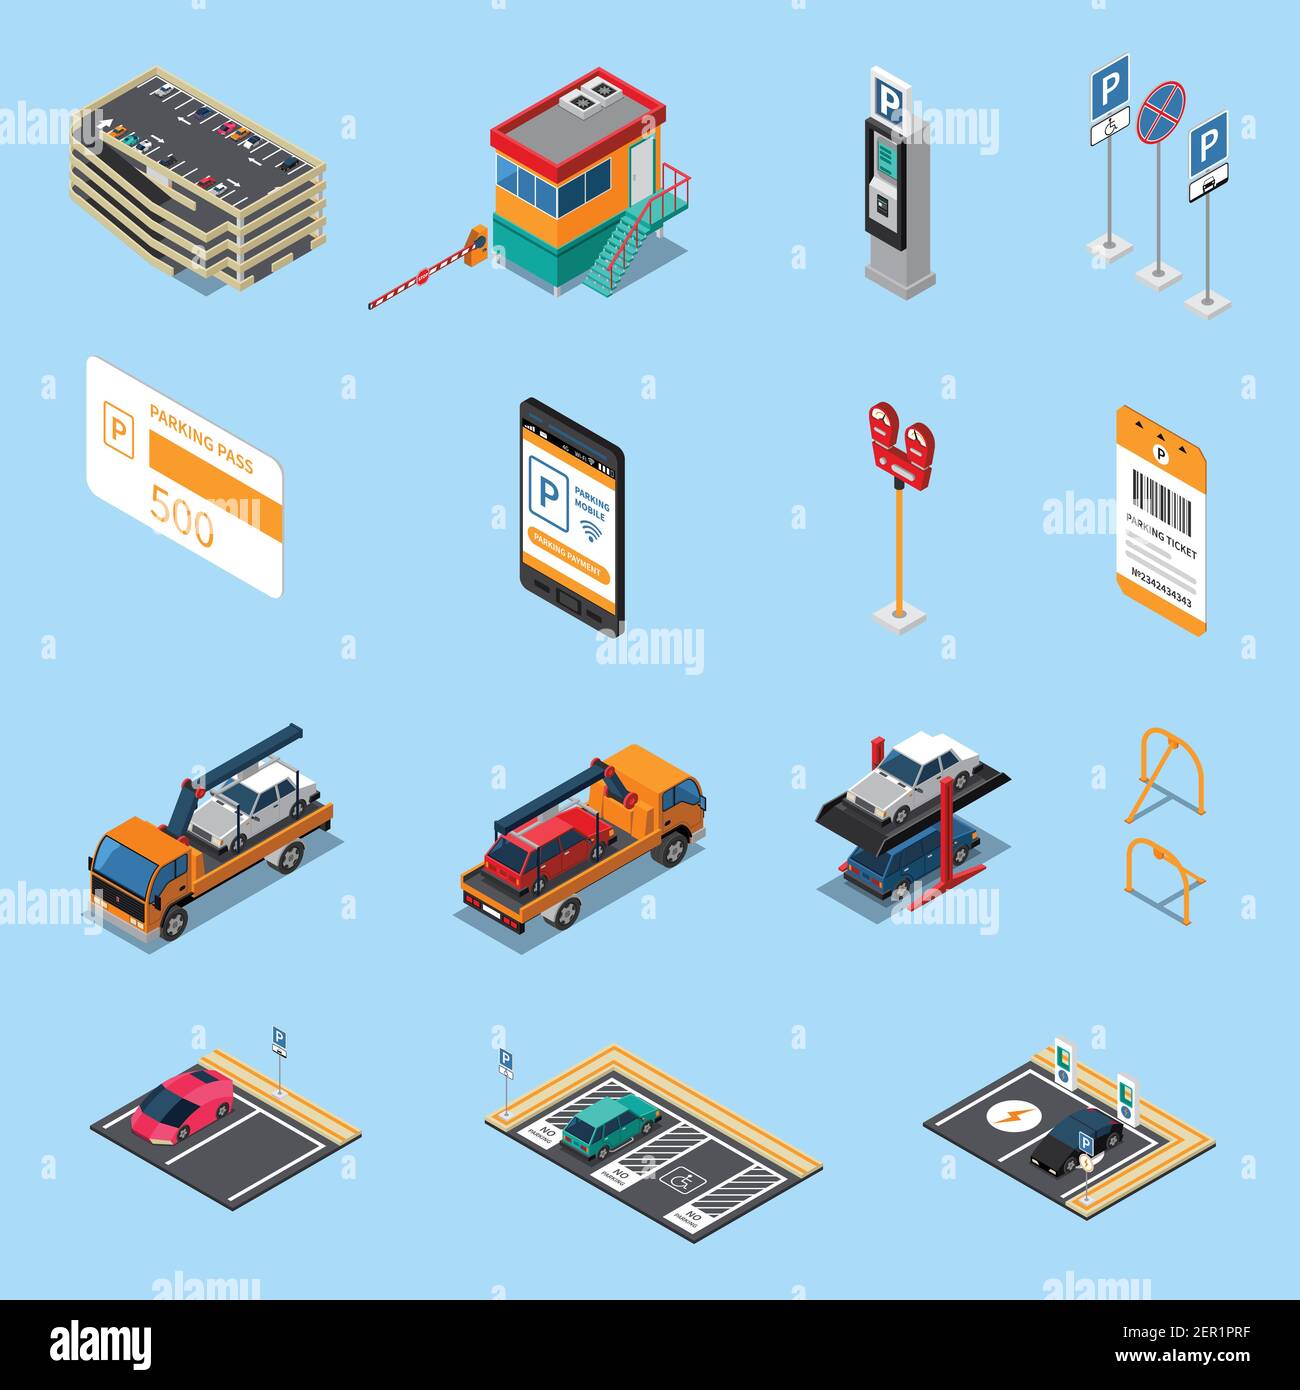 Parking lots facilities isometric icons set with multilevel garage pass ticket and tow truck isolated Stock Vector